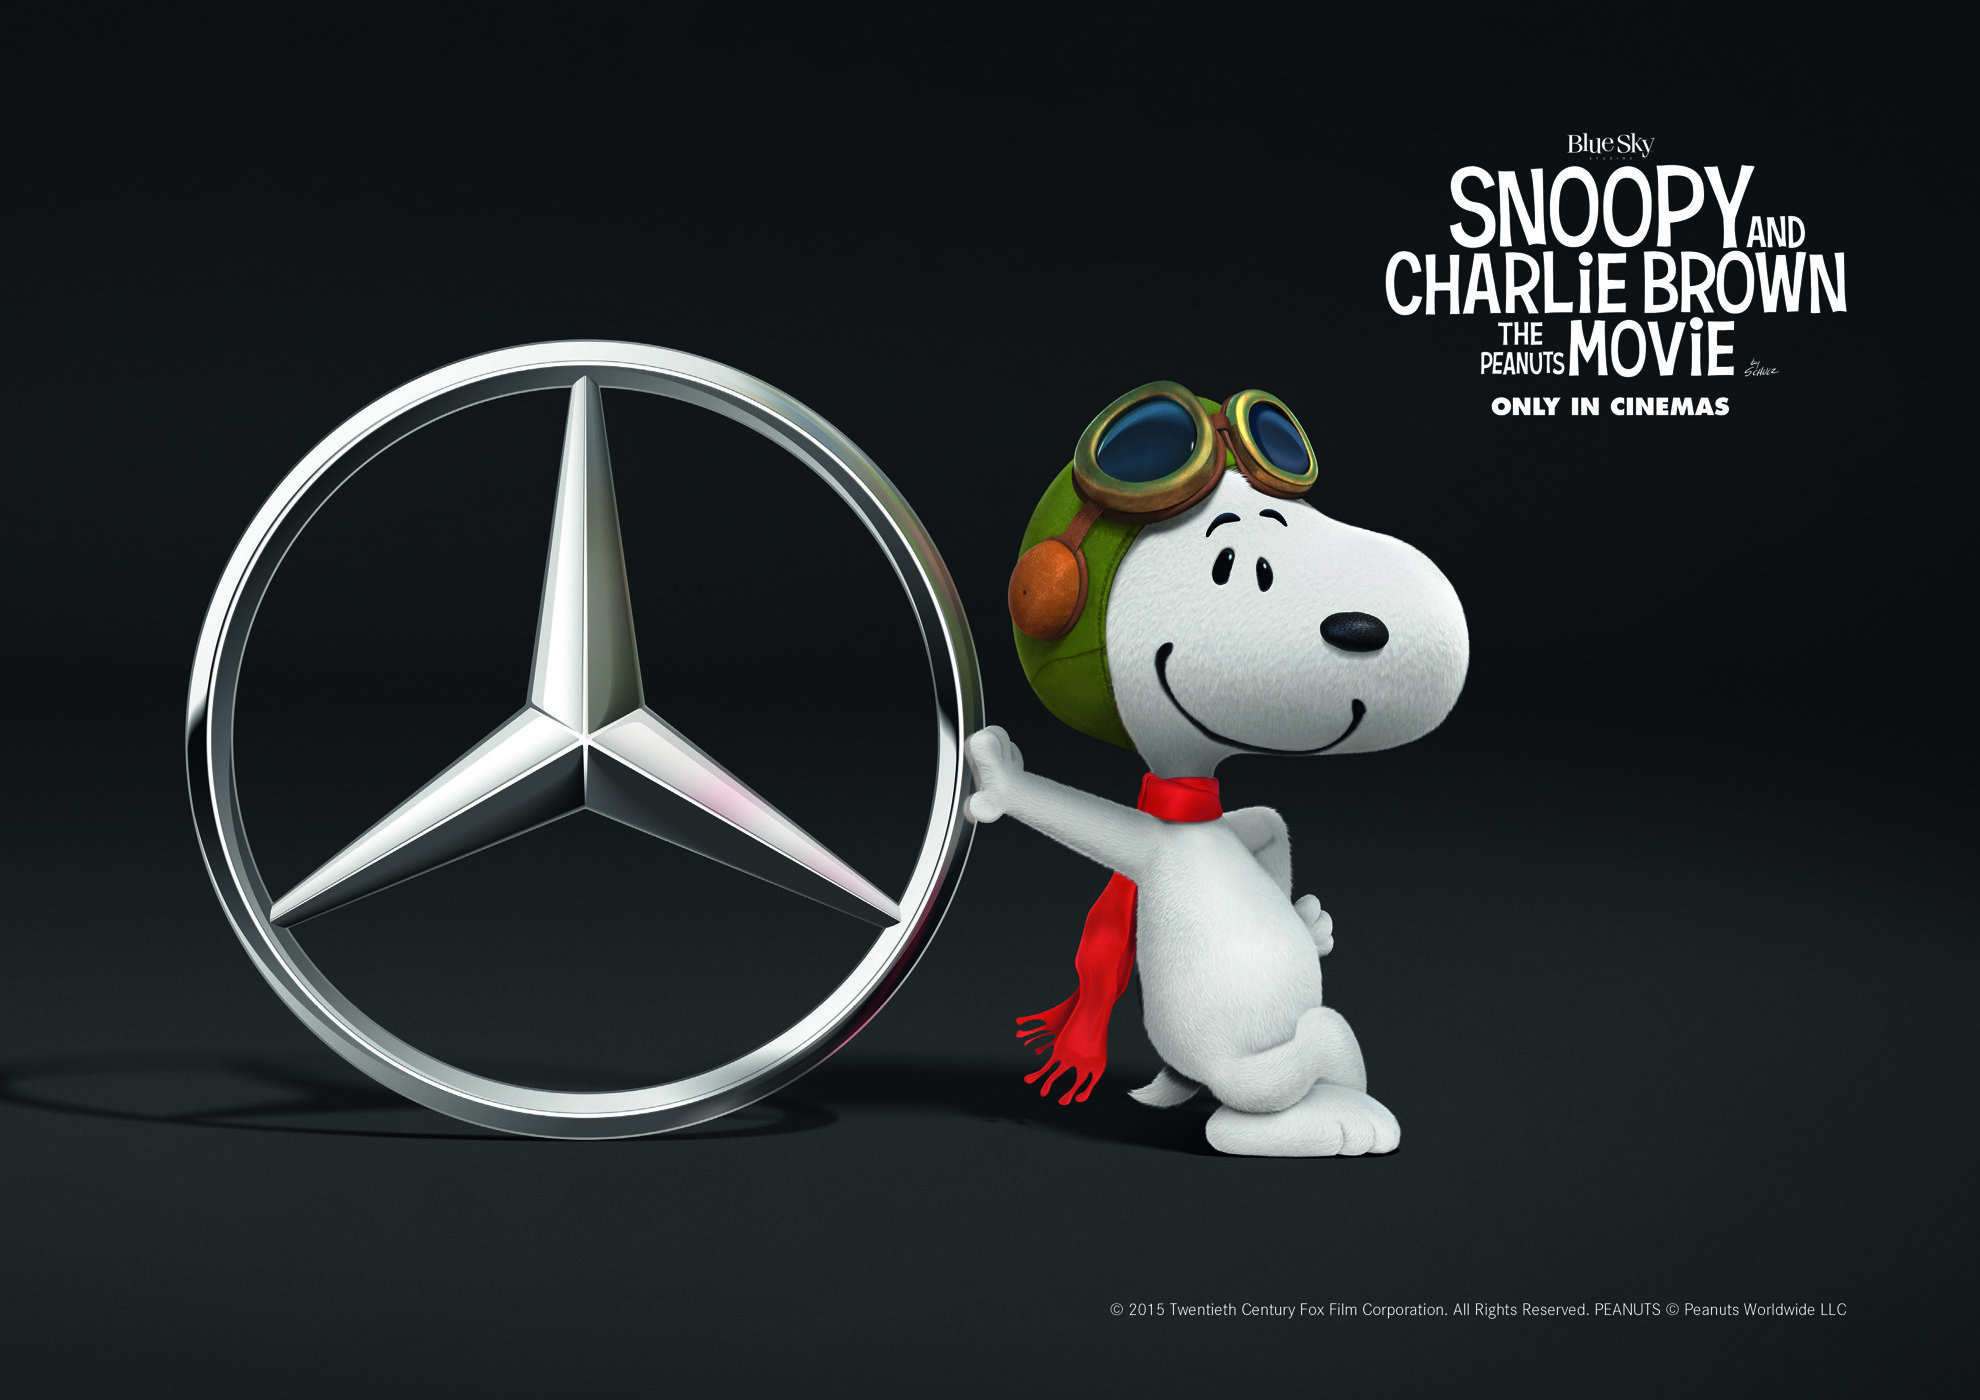 Charlie Brown Snoopy drives a Mercedes-Benz V-Class